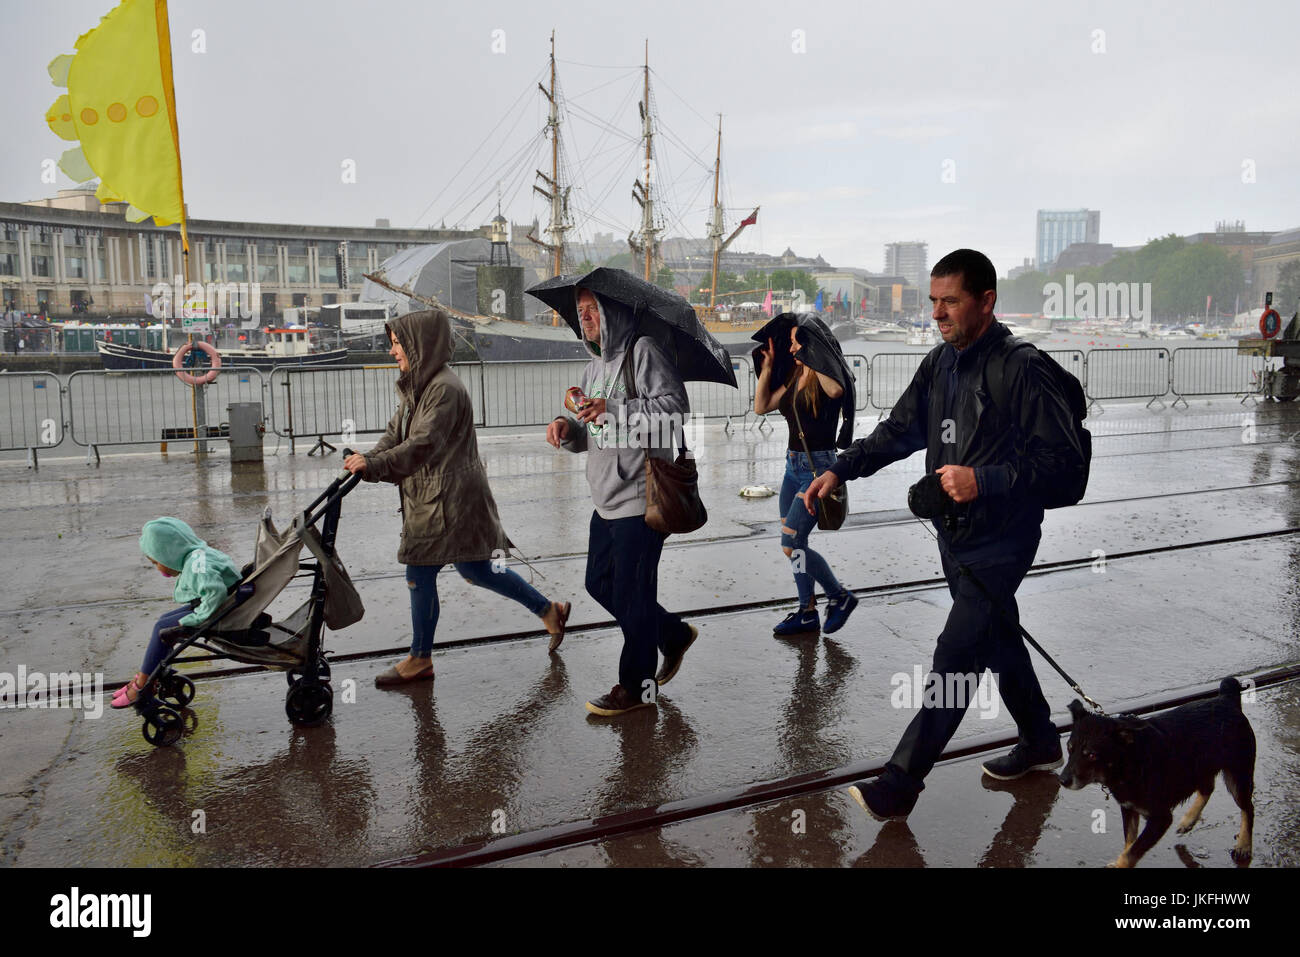 Bristol, UK. 23rd July, 2017. Rather mixed starting with heavy rain before the festival opened at 12:00 which then cleared to mixed sunshine and cloud. By 16:00 the forecasts were correct and a downpour commenced easing off at the official closing time for the festival. People trying to protect themselves from the rain walking along Bristol harbour quayside by M Shed.s. Credit: Charles Stirling/Alamy Live News Stock Photo